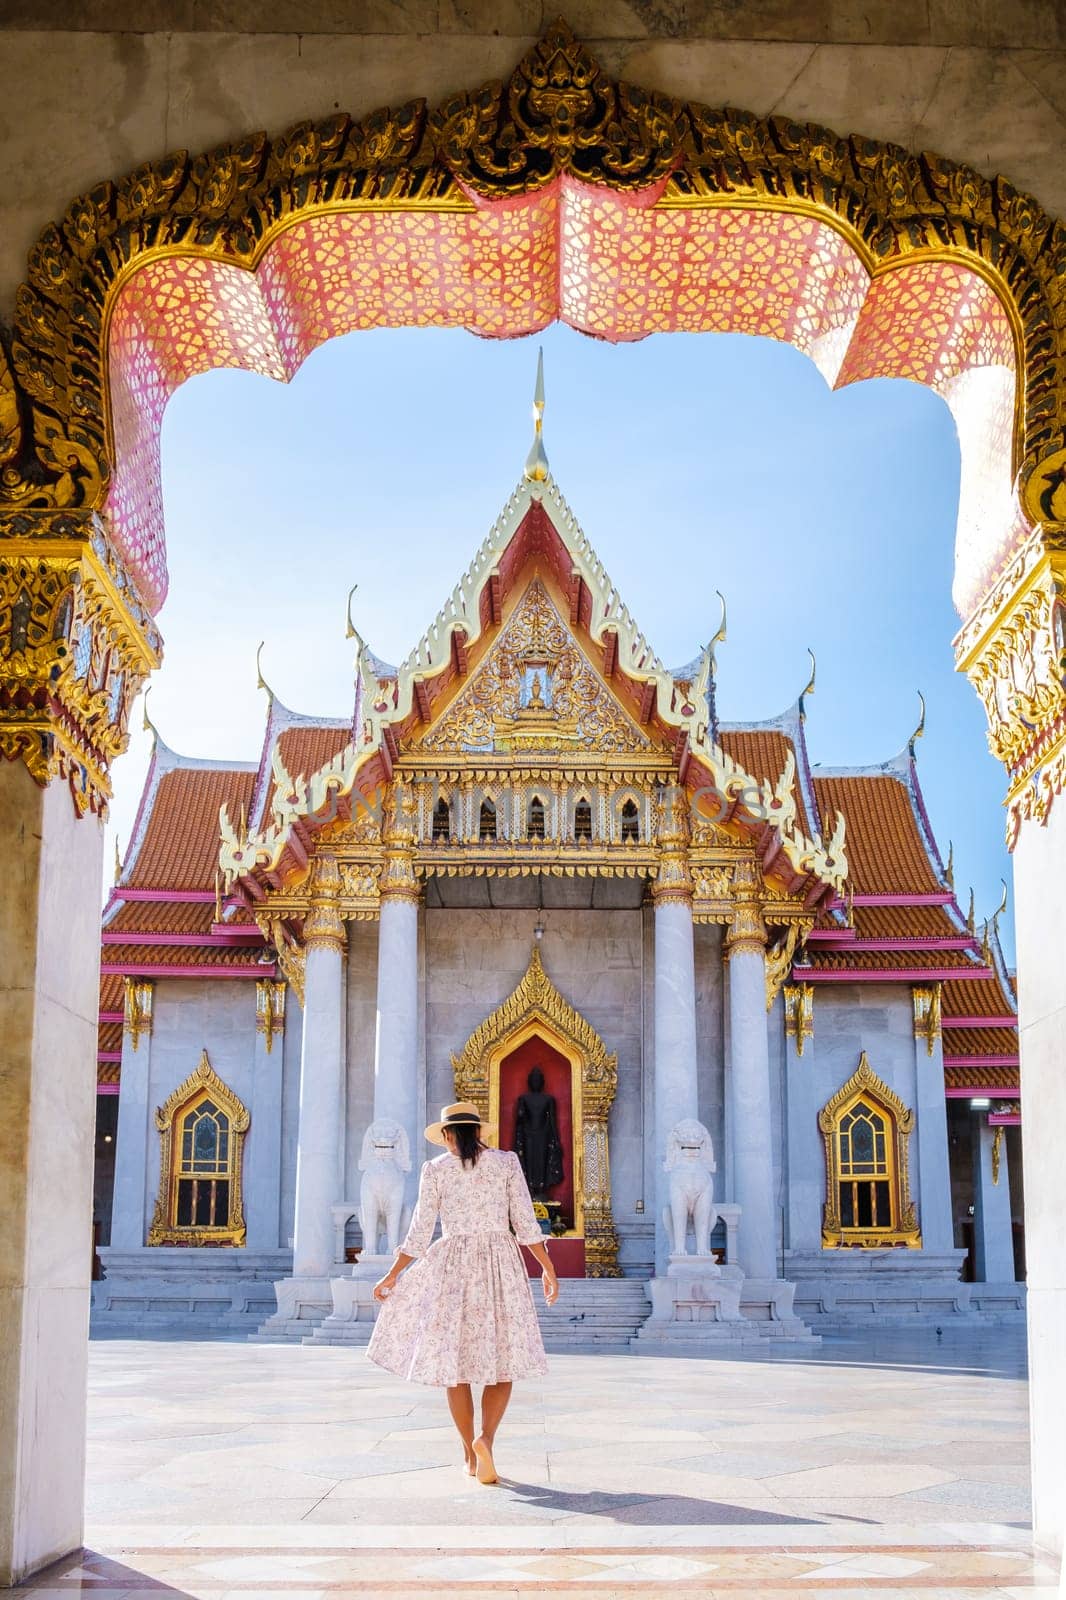 Wat Benchamabophit temple in Bangkok Thailand, The Marble temple in Bangkok by fokkebok